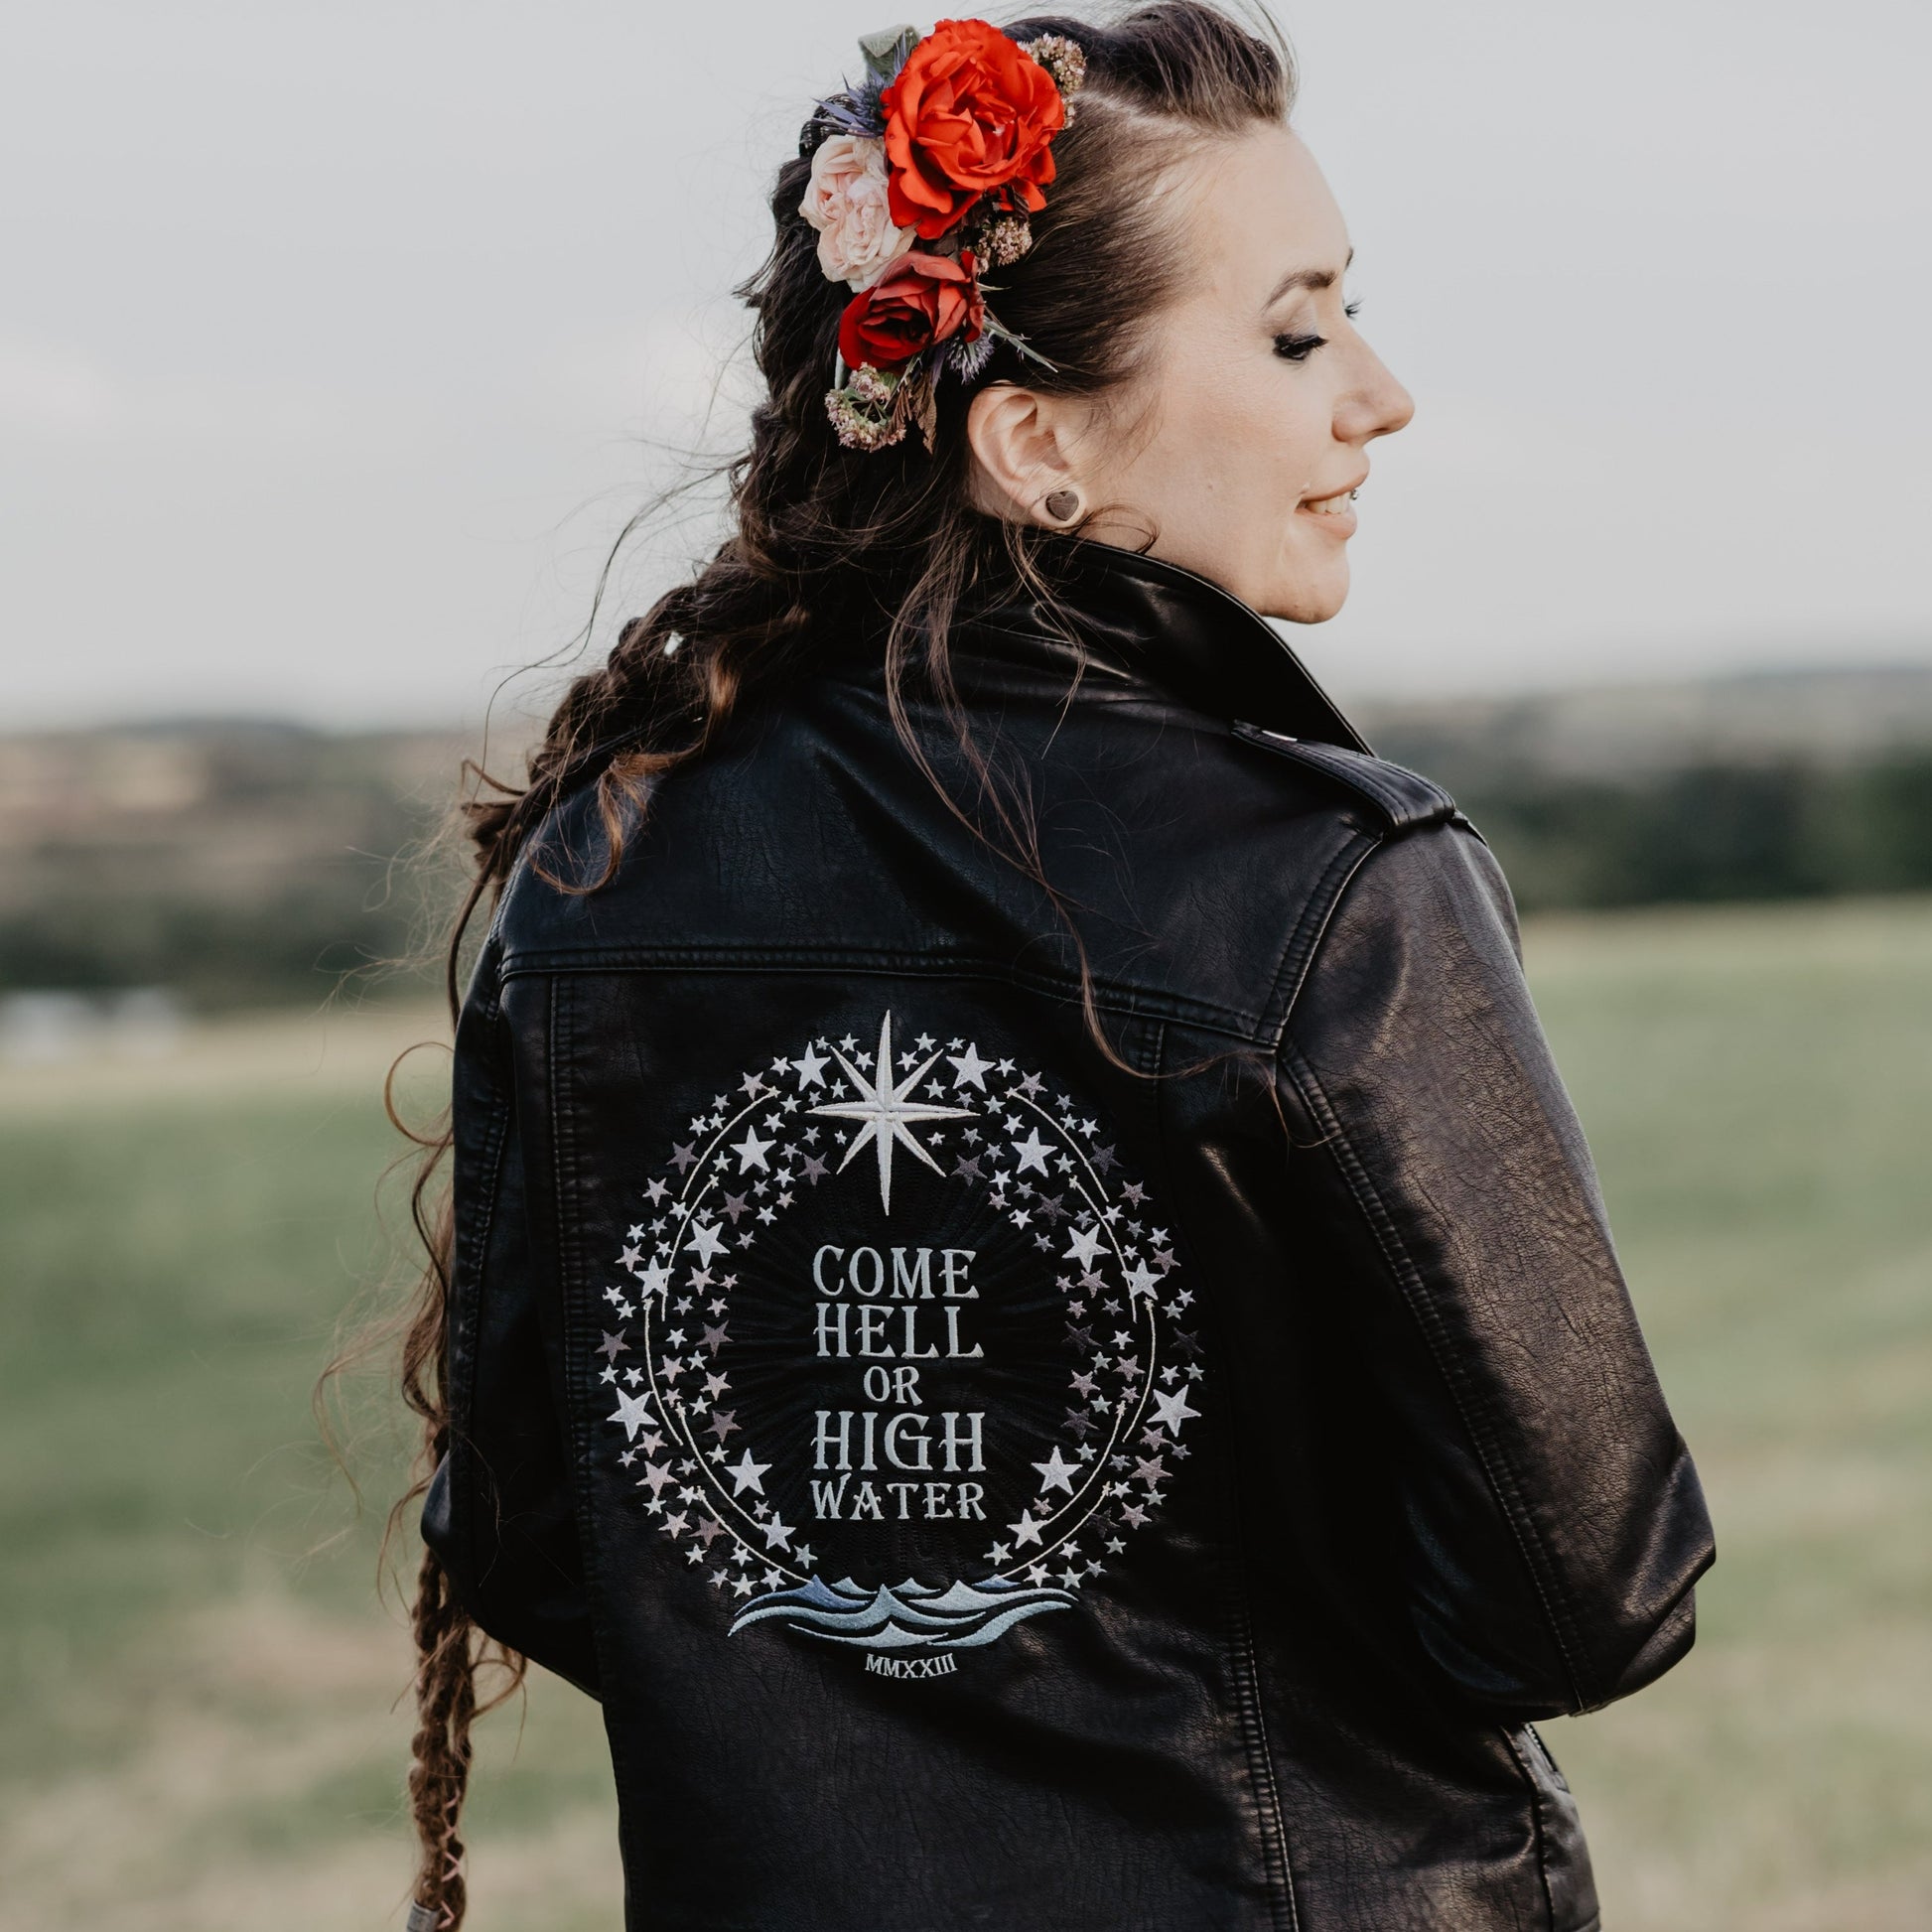 Chic and fearless Come Hell or High Water Black Leather Jacket – a perfect cover-up for a confident wedding celebration